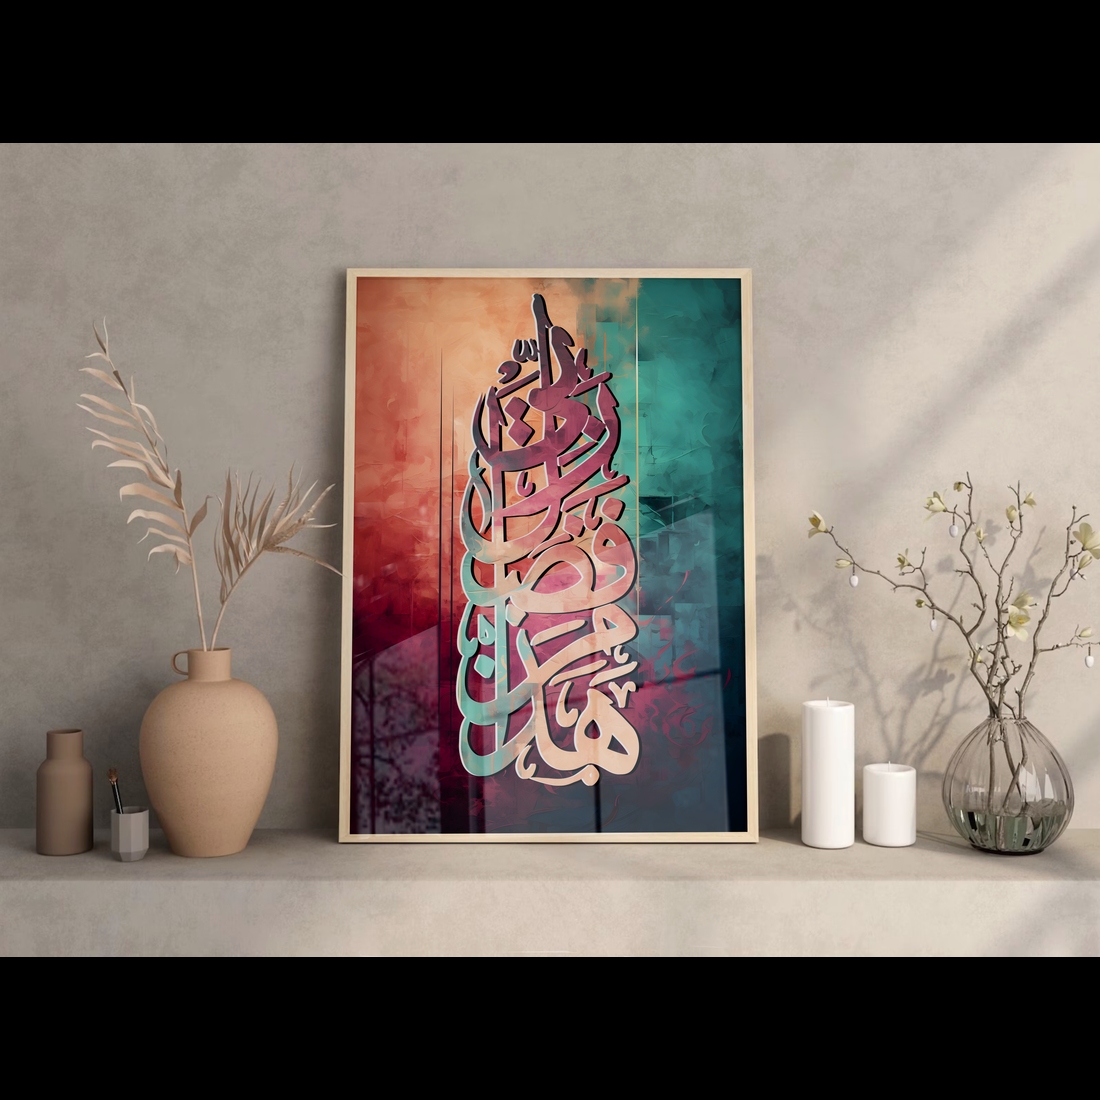 Calligraphic wall art preview image.